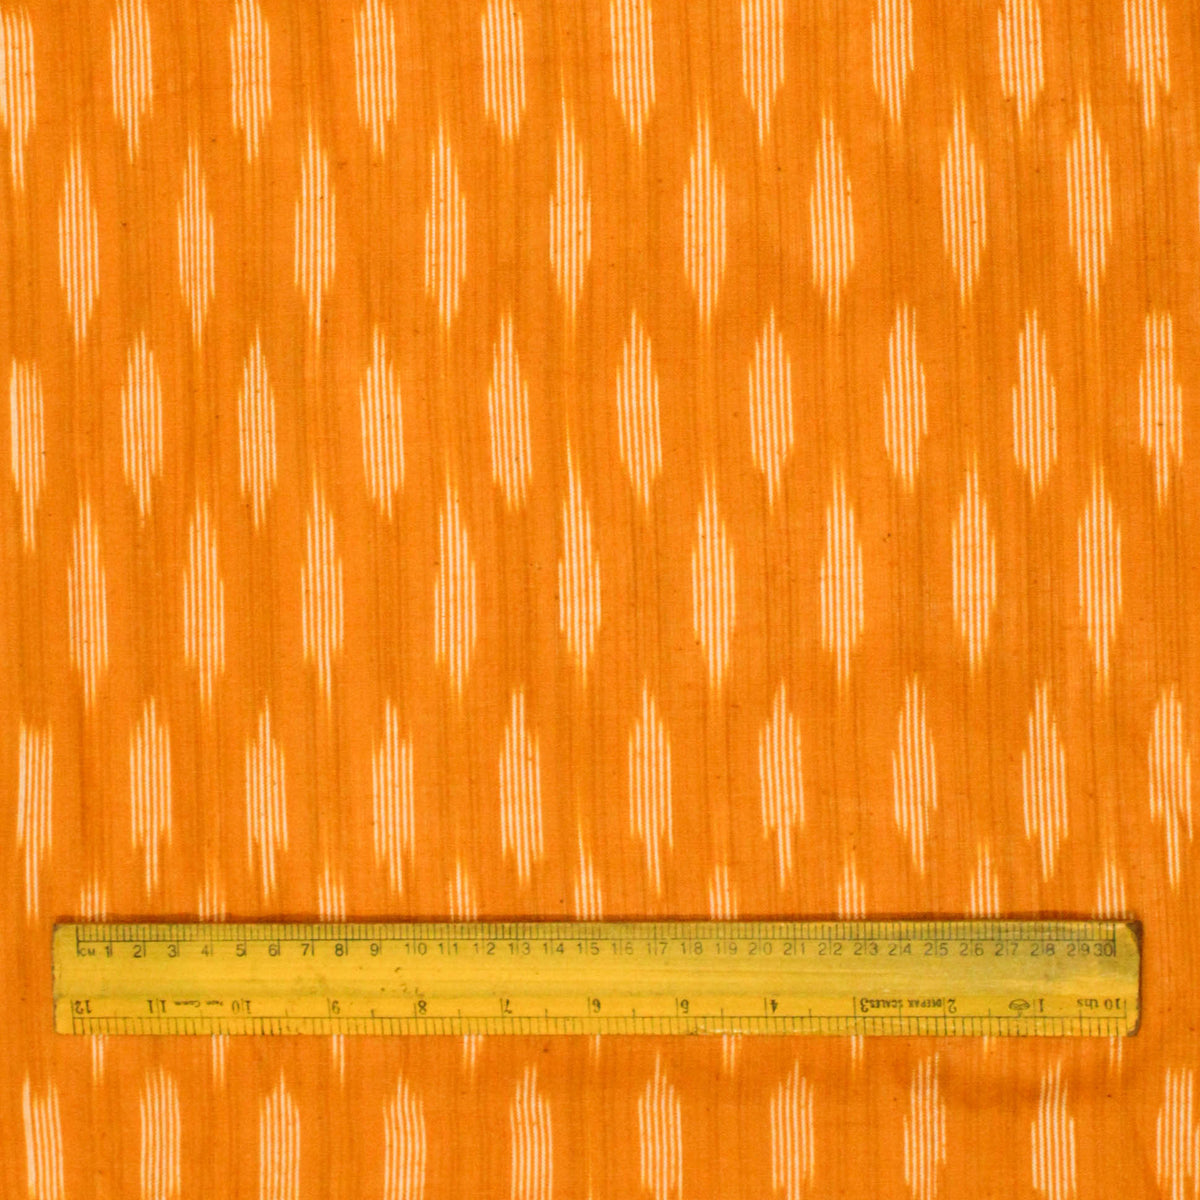 Ikat Hand Woven Cotton Fabric Design - Orange Yellow With Tiny Weaves